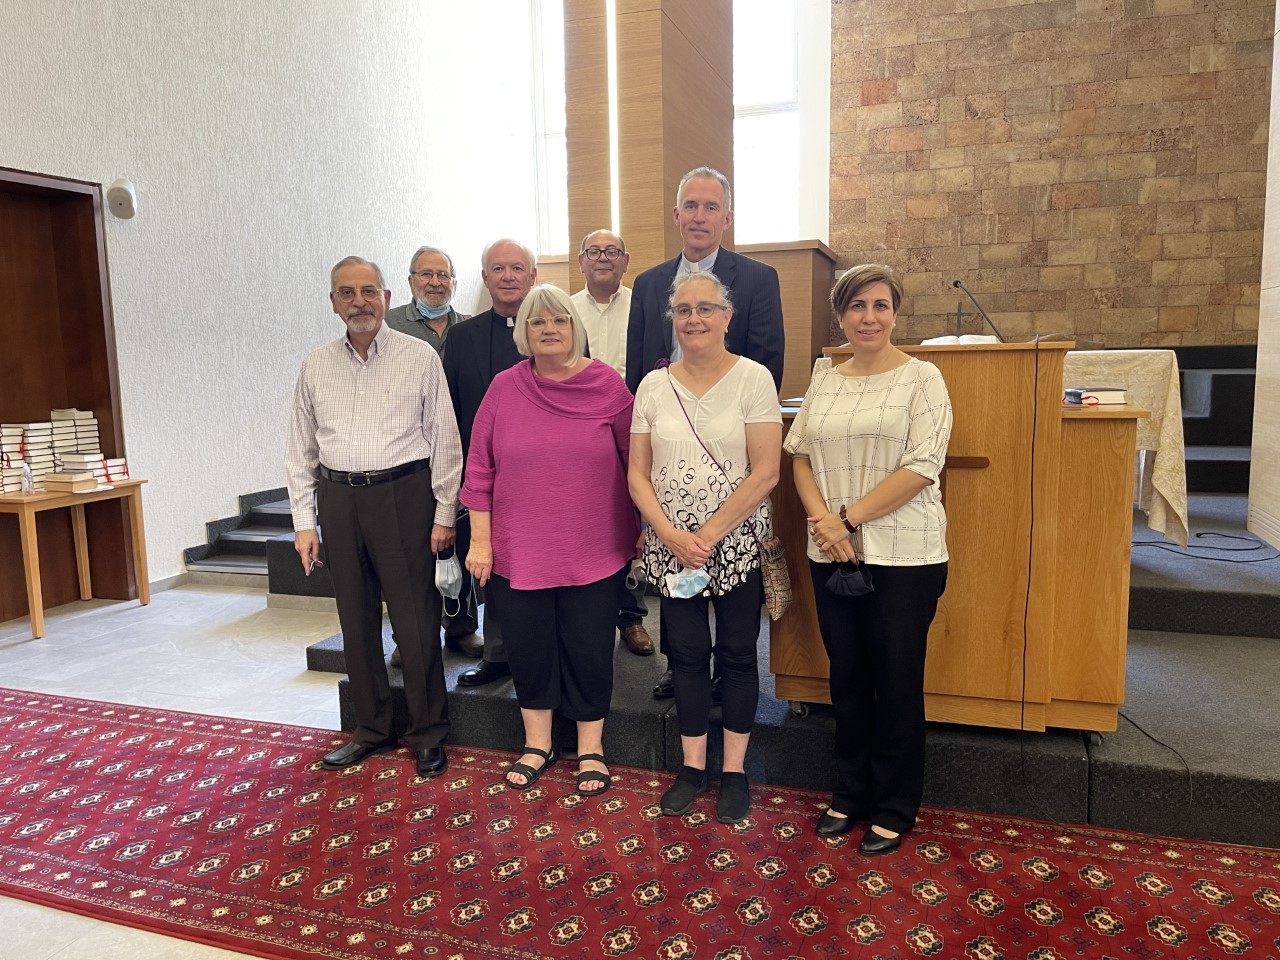  Our team with Dr. Sabra and faculty, Dr. Johnny Awad and Rev Rima Nasrallah, in the newly renovated Grace Chapel  